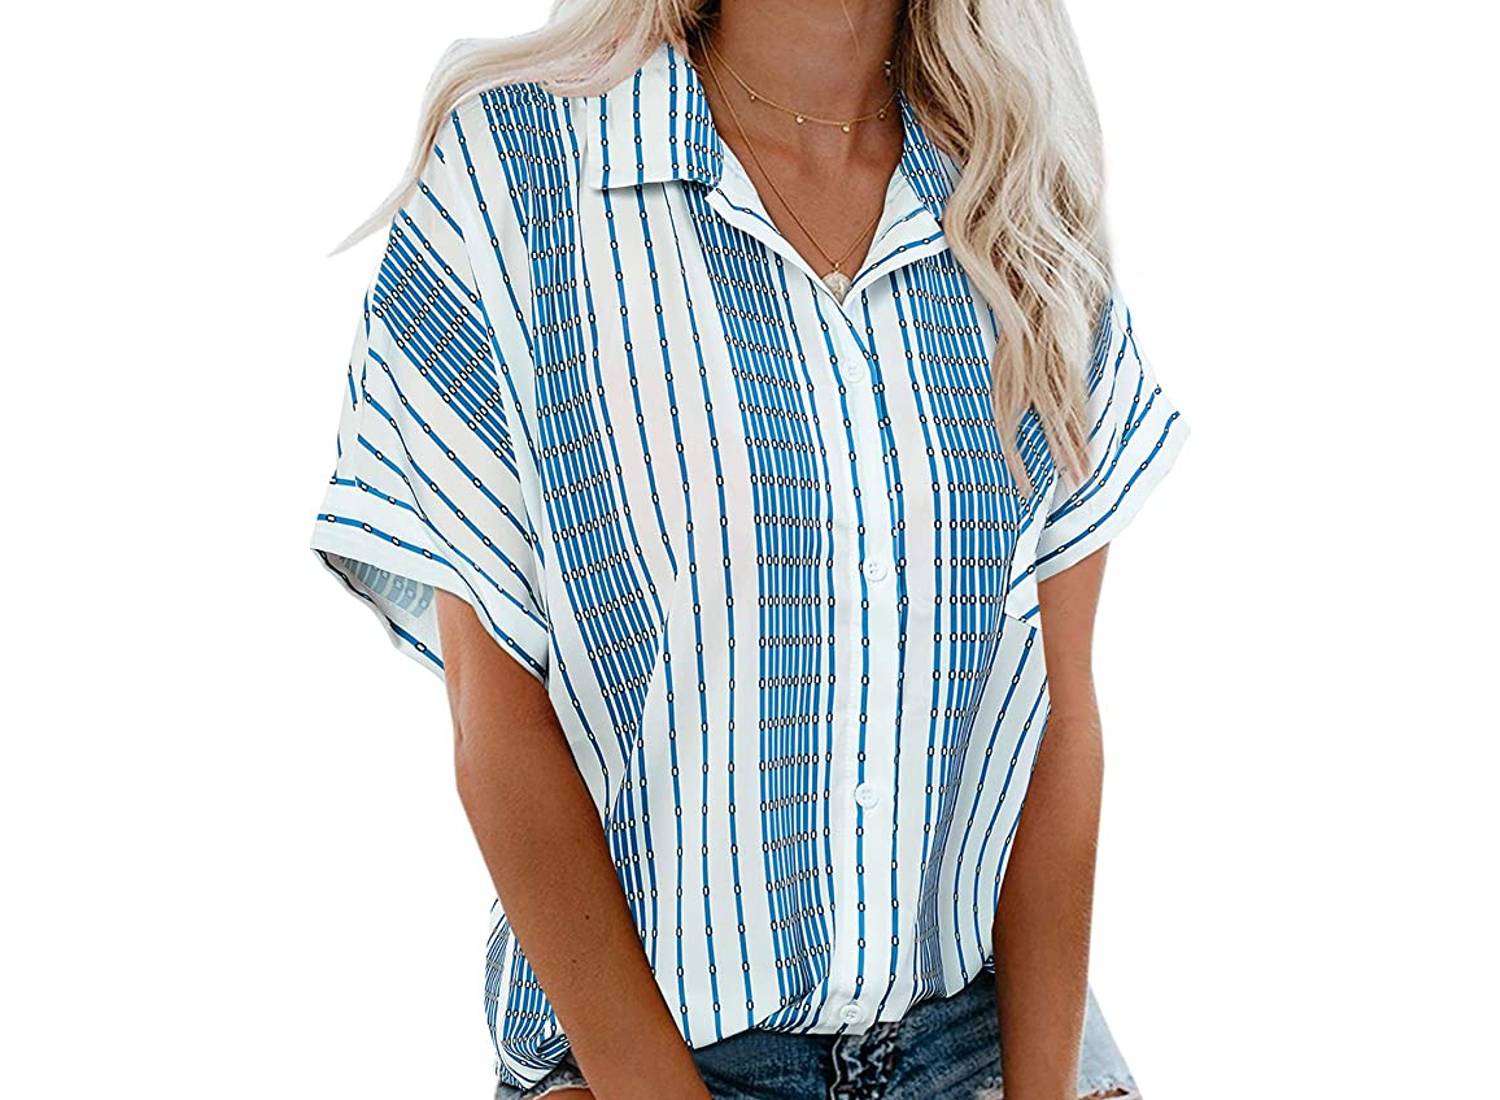 A woman wearing a blue and white striped button-down v-neck top